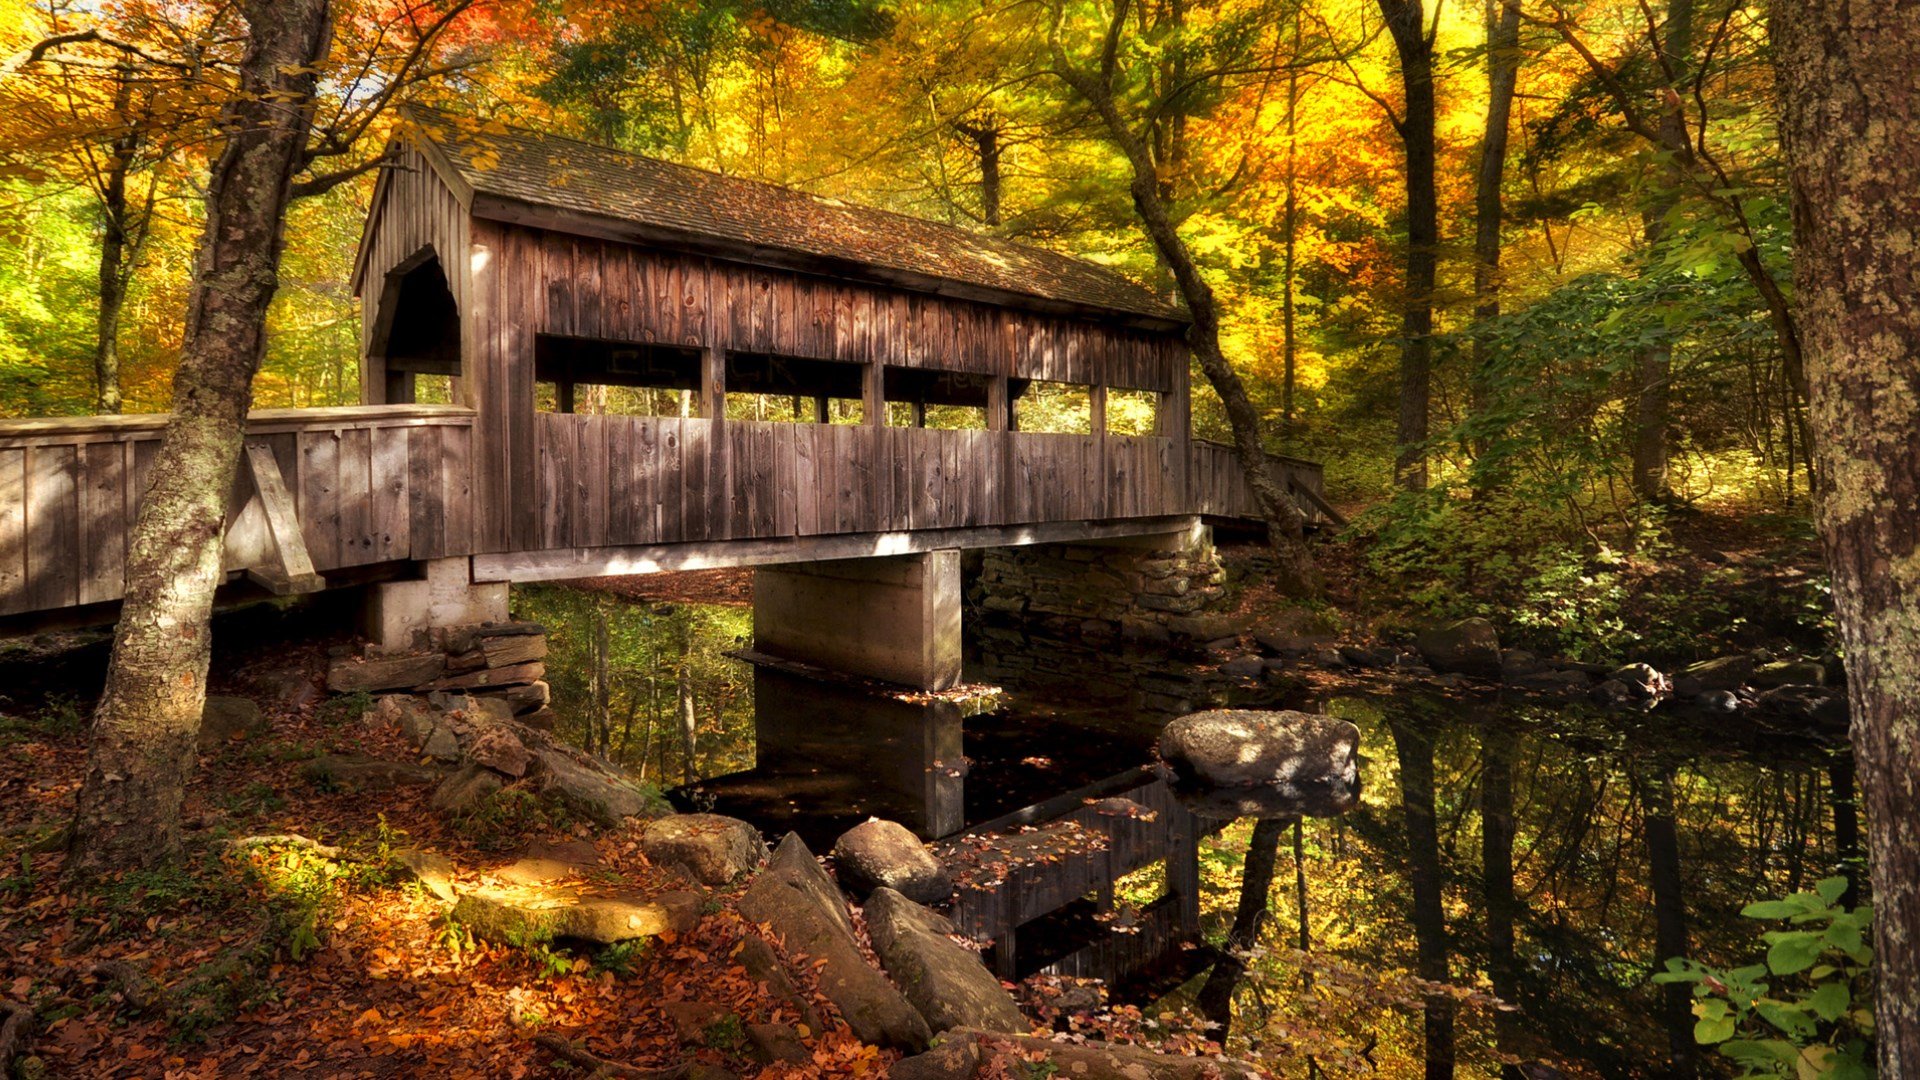 Microsoft celebrate the changing season with new free Bridges in Autumn Windows 10 wallpaper pack